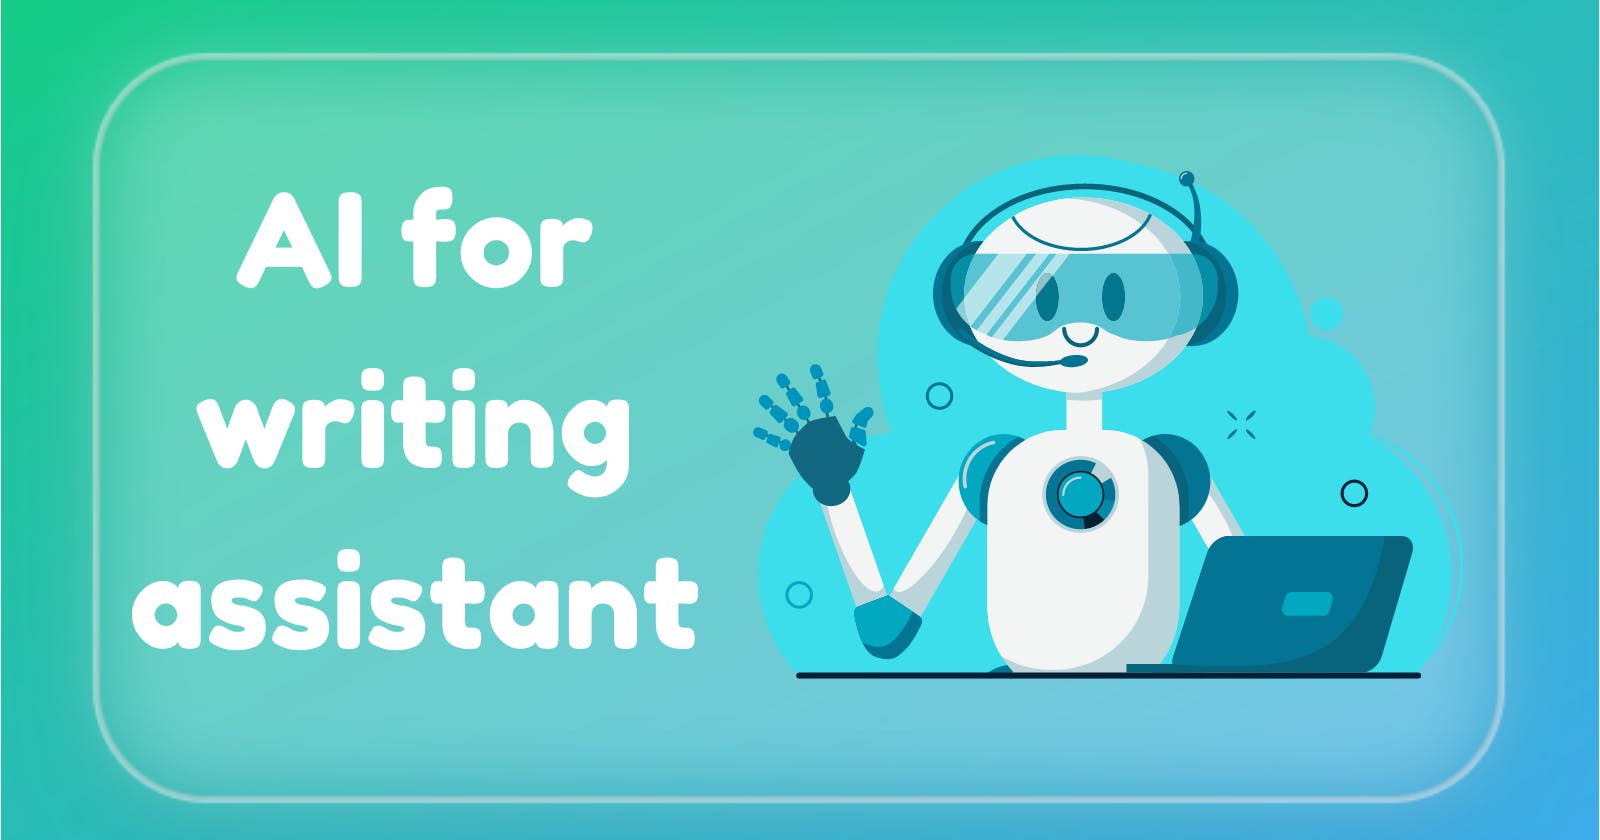 AI🤖 for writing assistant!